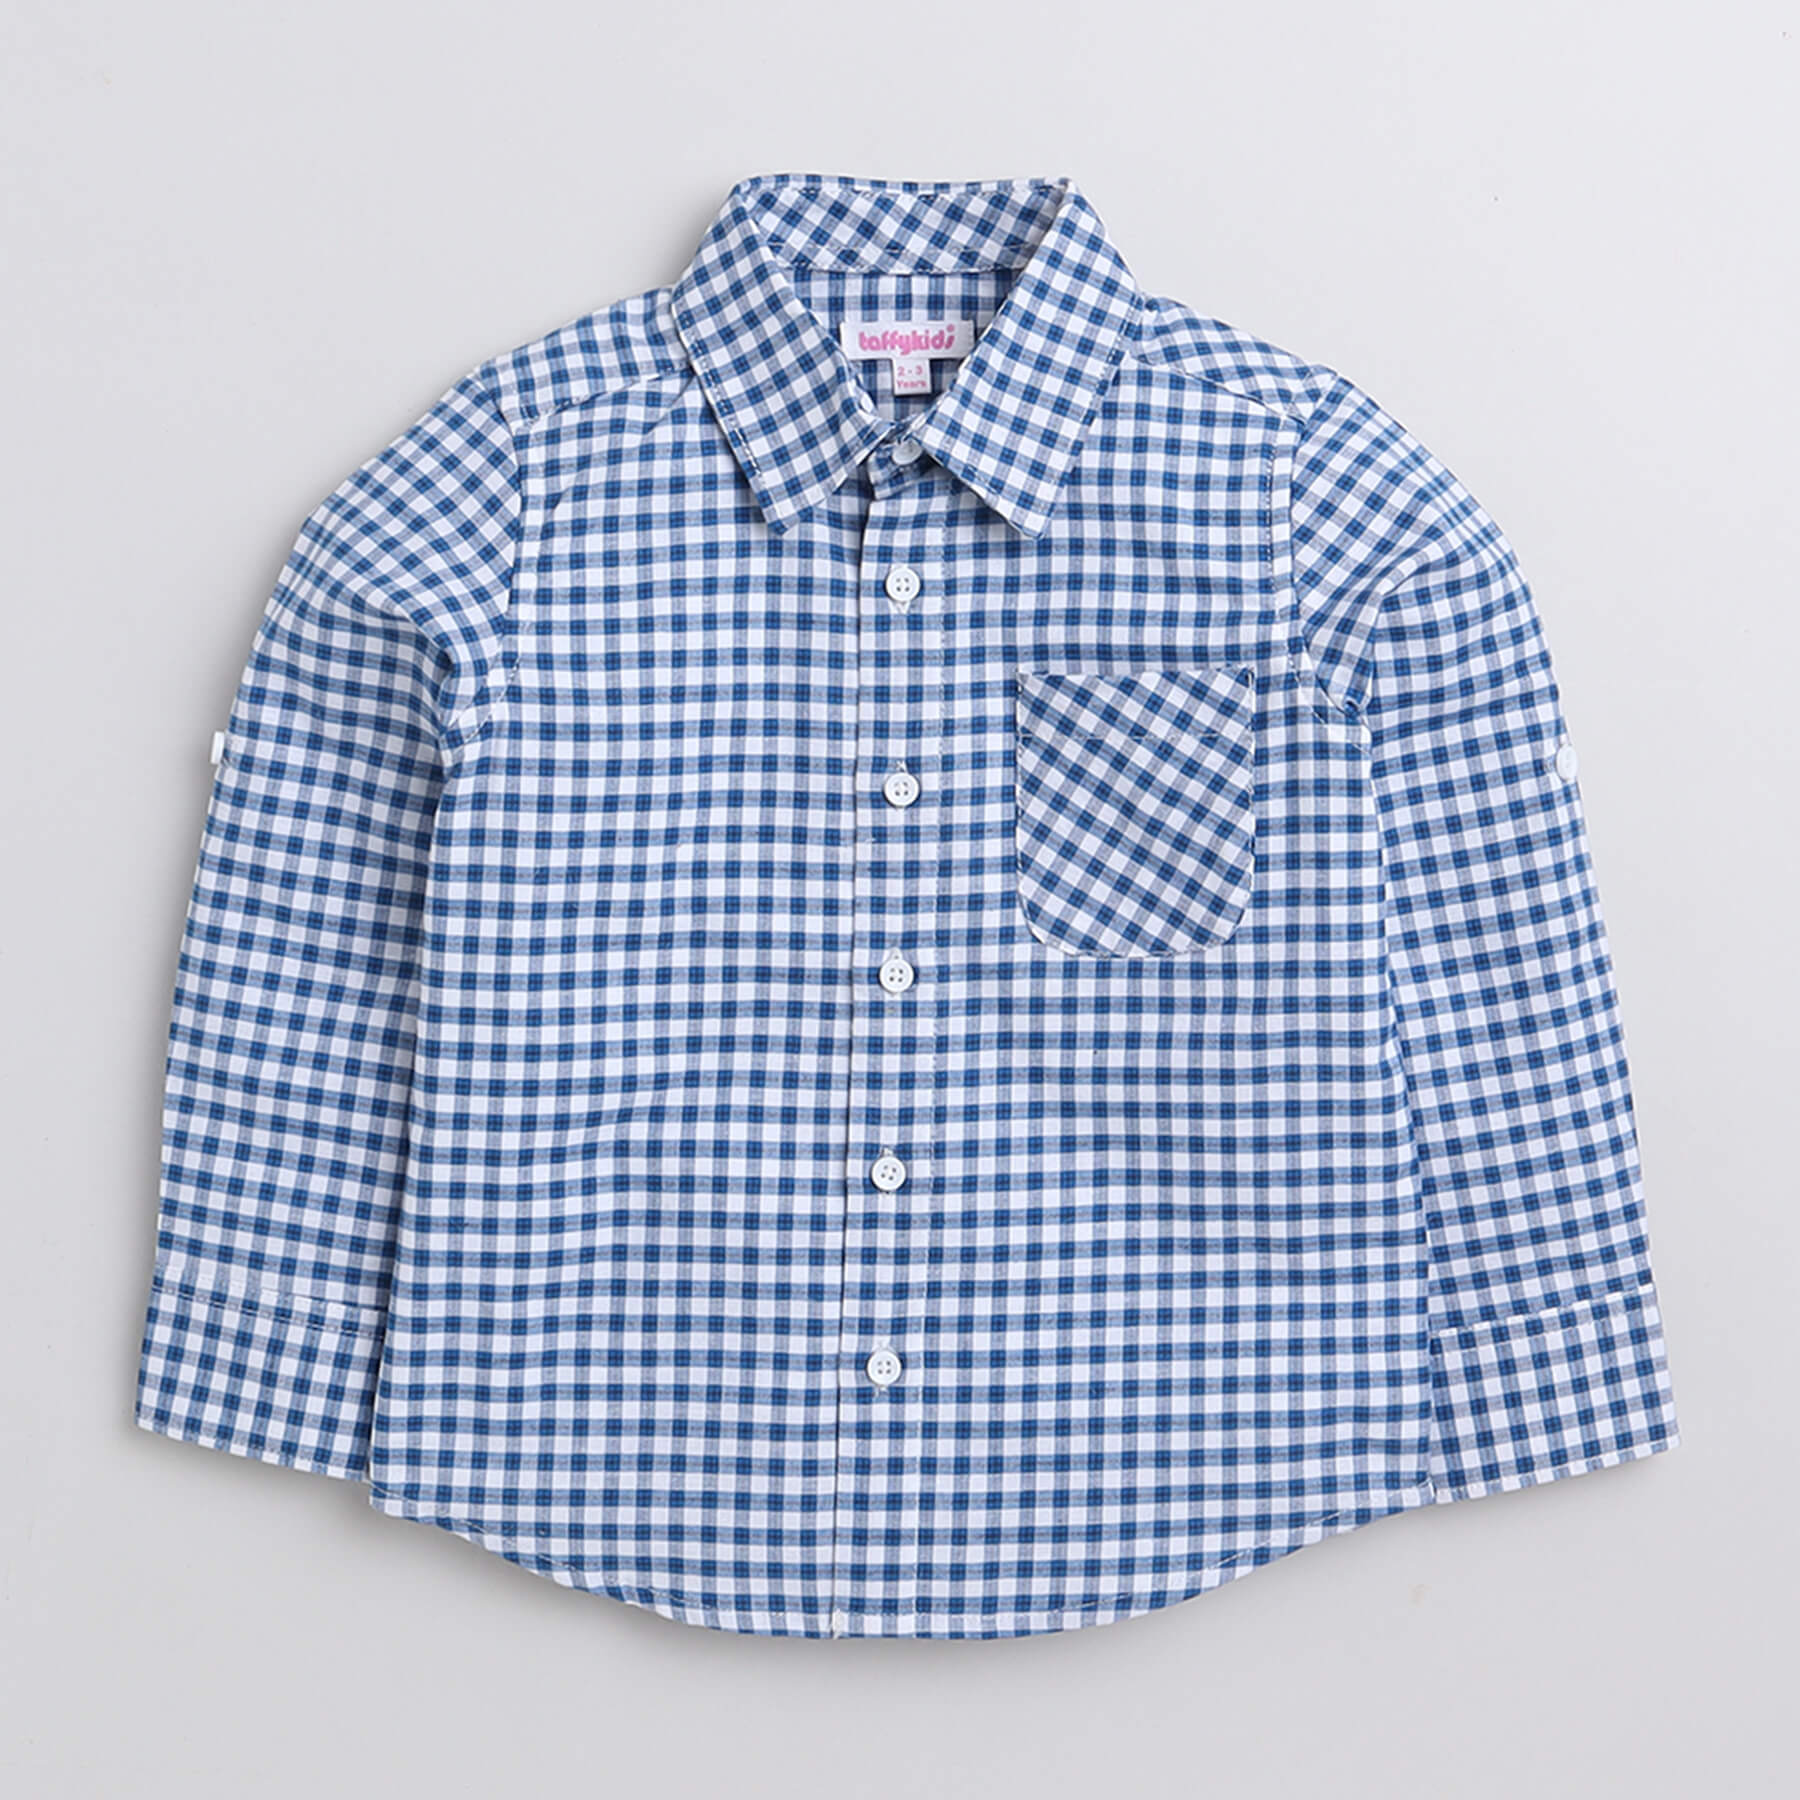 Taffykids checks turn up full sleeves shirt with attached tee - Black/White